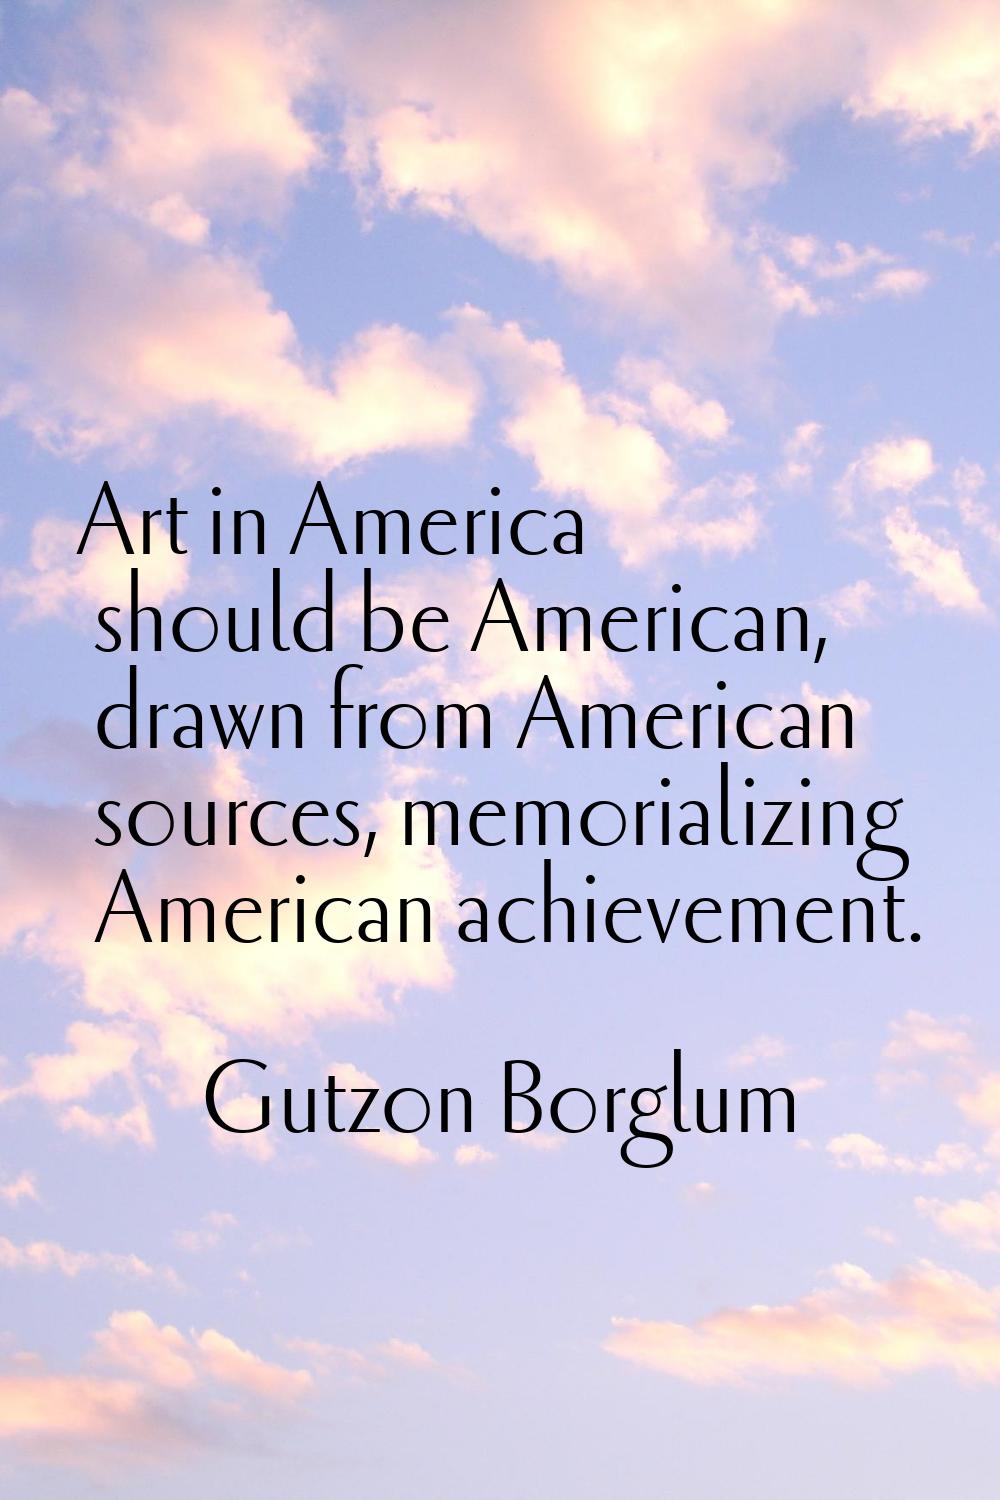 Art in America should be American, drawn from American sources, memorializing American achievement.